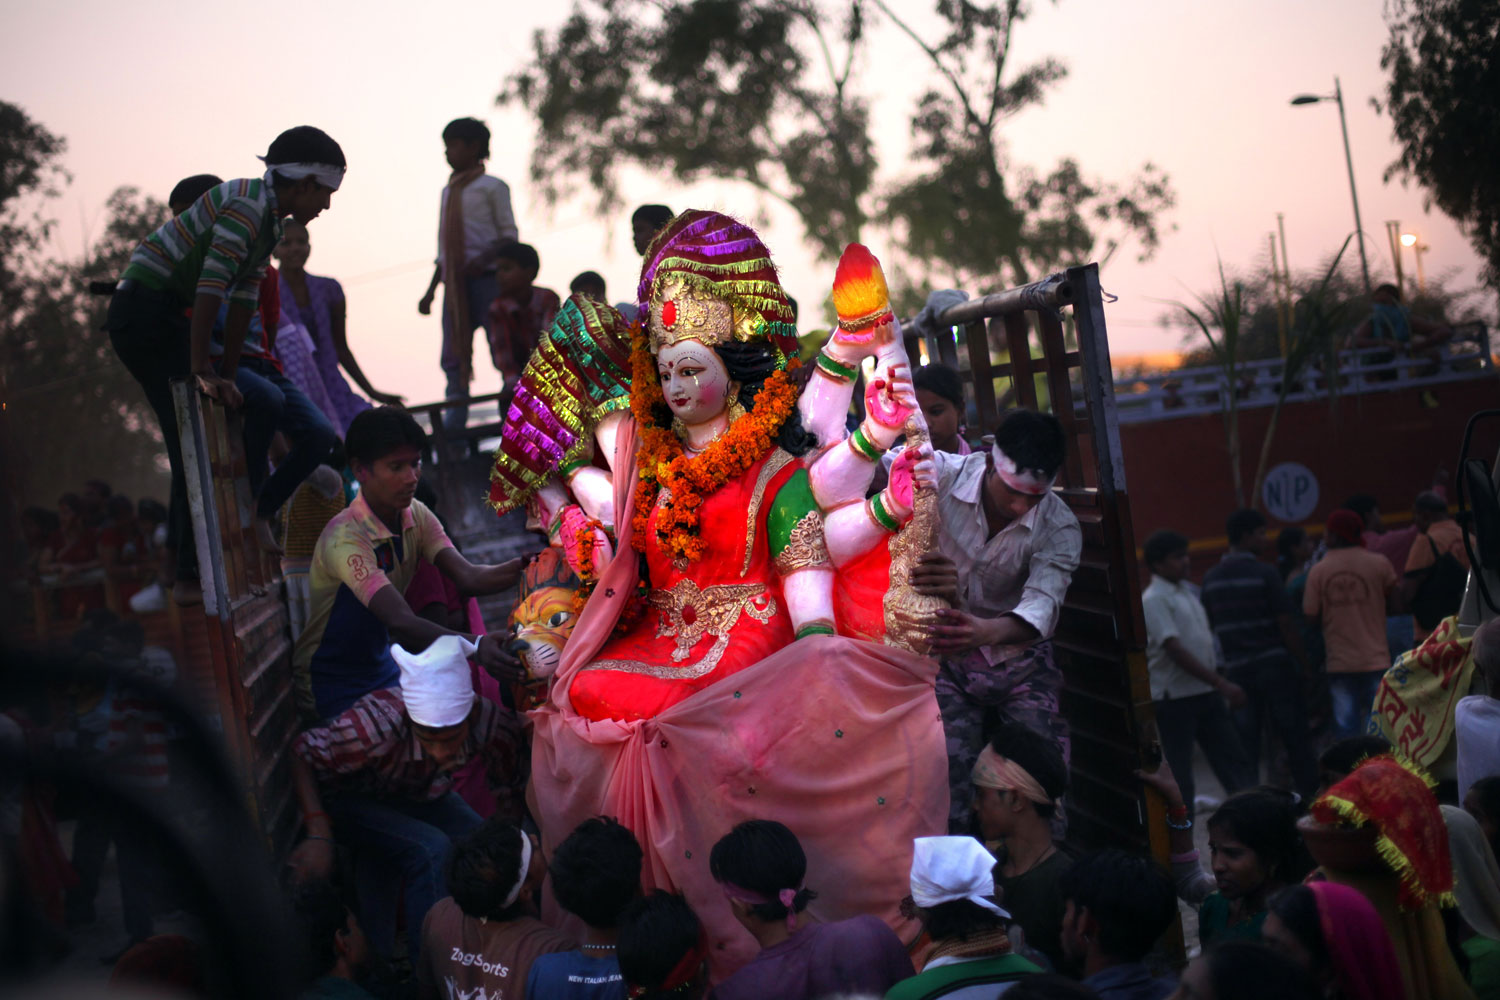 Image: Oct. 24, 2012. Hindu devotees unload an idol of the Hindu goddess Durga for immersion into the Yamuna river during Durga Puja festivities in New Delhi, India.